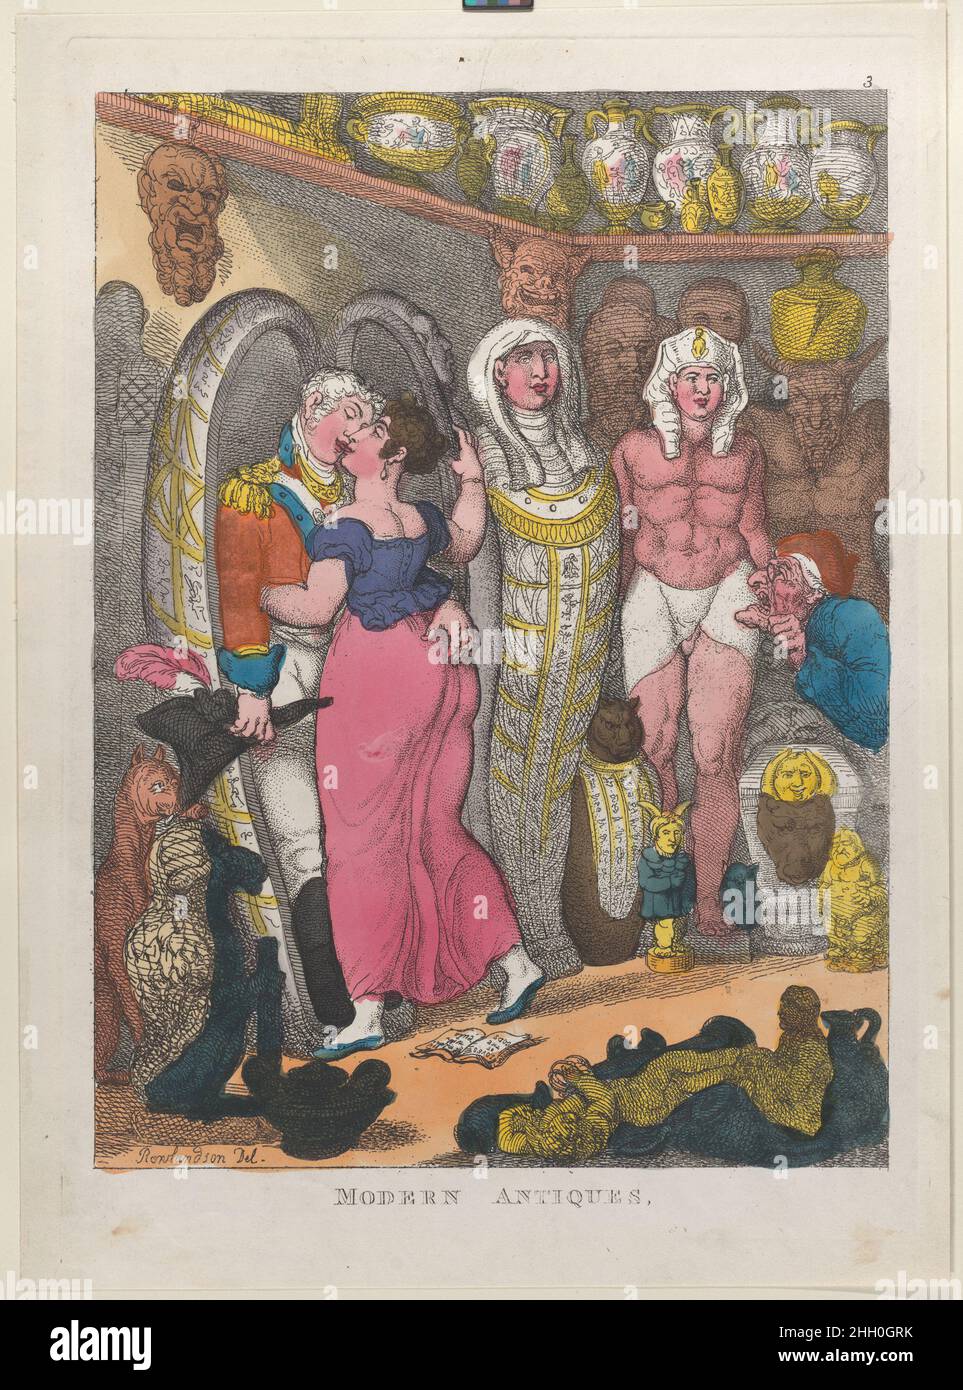 Modern Antiques 1811? Thomas Rowlandson Among a collection of Egyptian and classical antiques a young woman is embraced by an officer, who draws her into a mummy case. Also in the room is an elderly man with a monocle who inspects a sarcophagus. On the floor an open book reads: 'Loves of the Gods, embell'd with Cuts'. Modern Antiques. Thomas Rowlandson (British, London 1757–1827 London). 1811?. Hand-colored etching. Published by? Thomas Tegg (British, 1776–1846). Prints Stock Photo